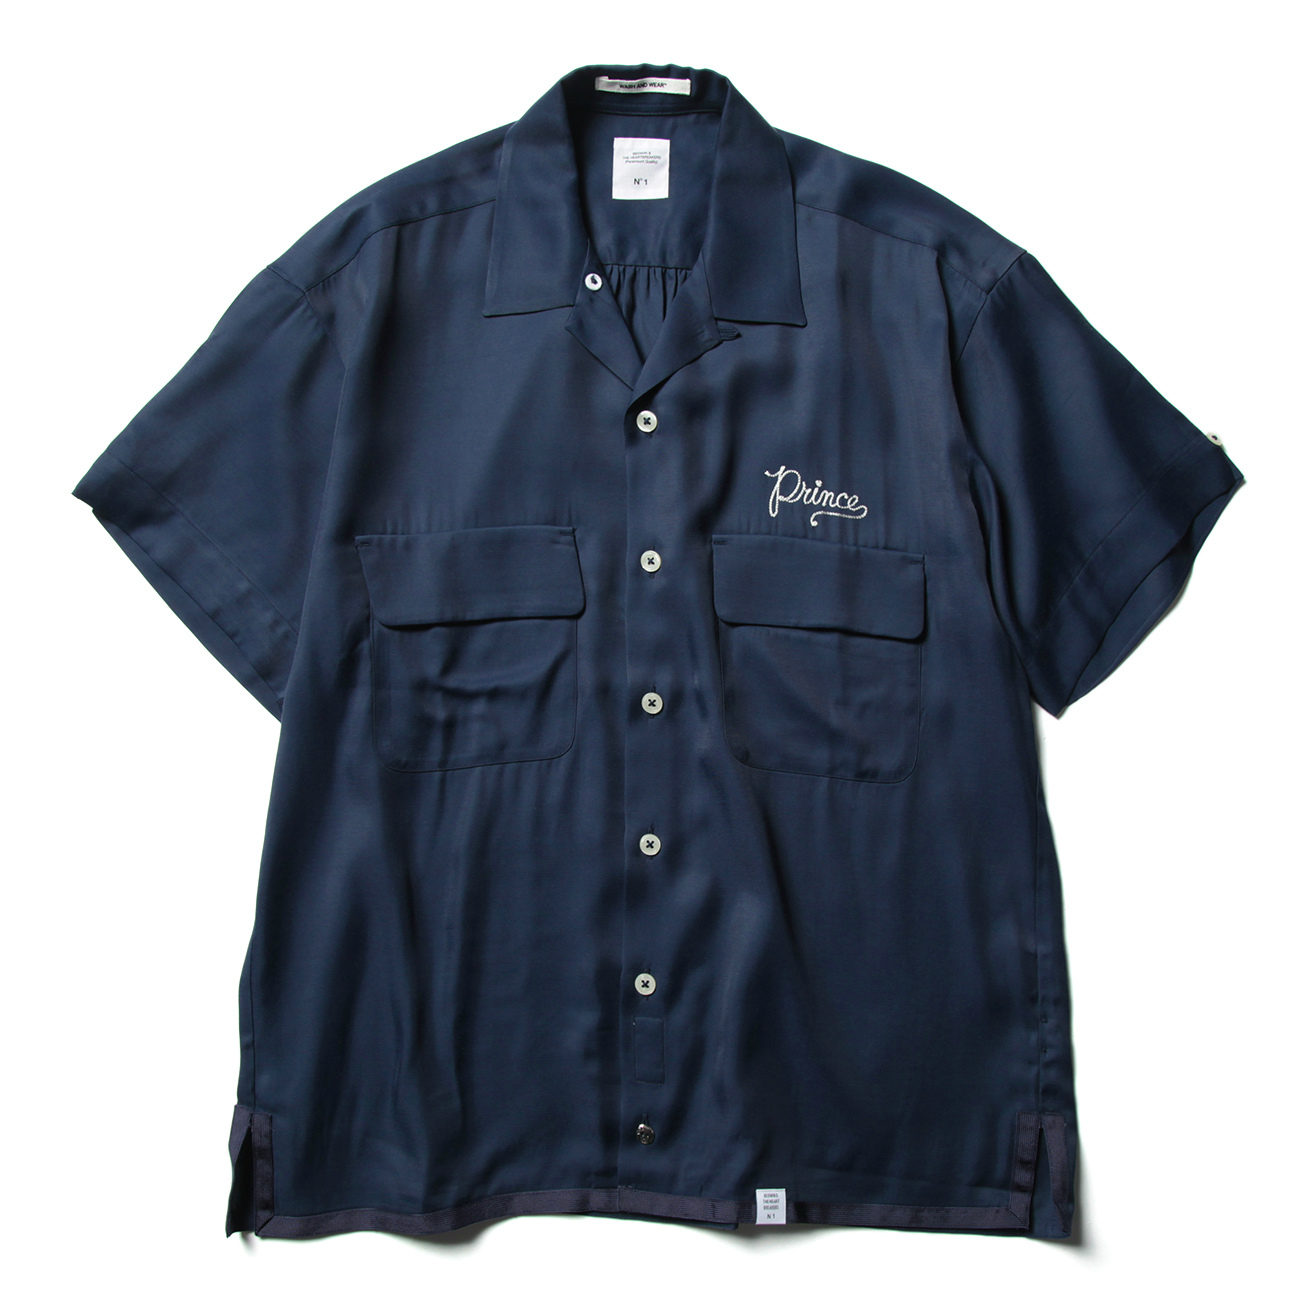 S/S OPEN COLLAR BOWLING SHIRT “MARSHALL” paris-epee.fr